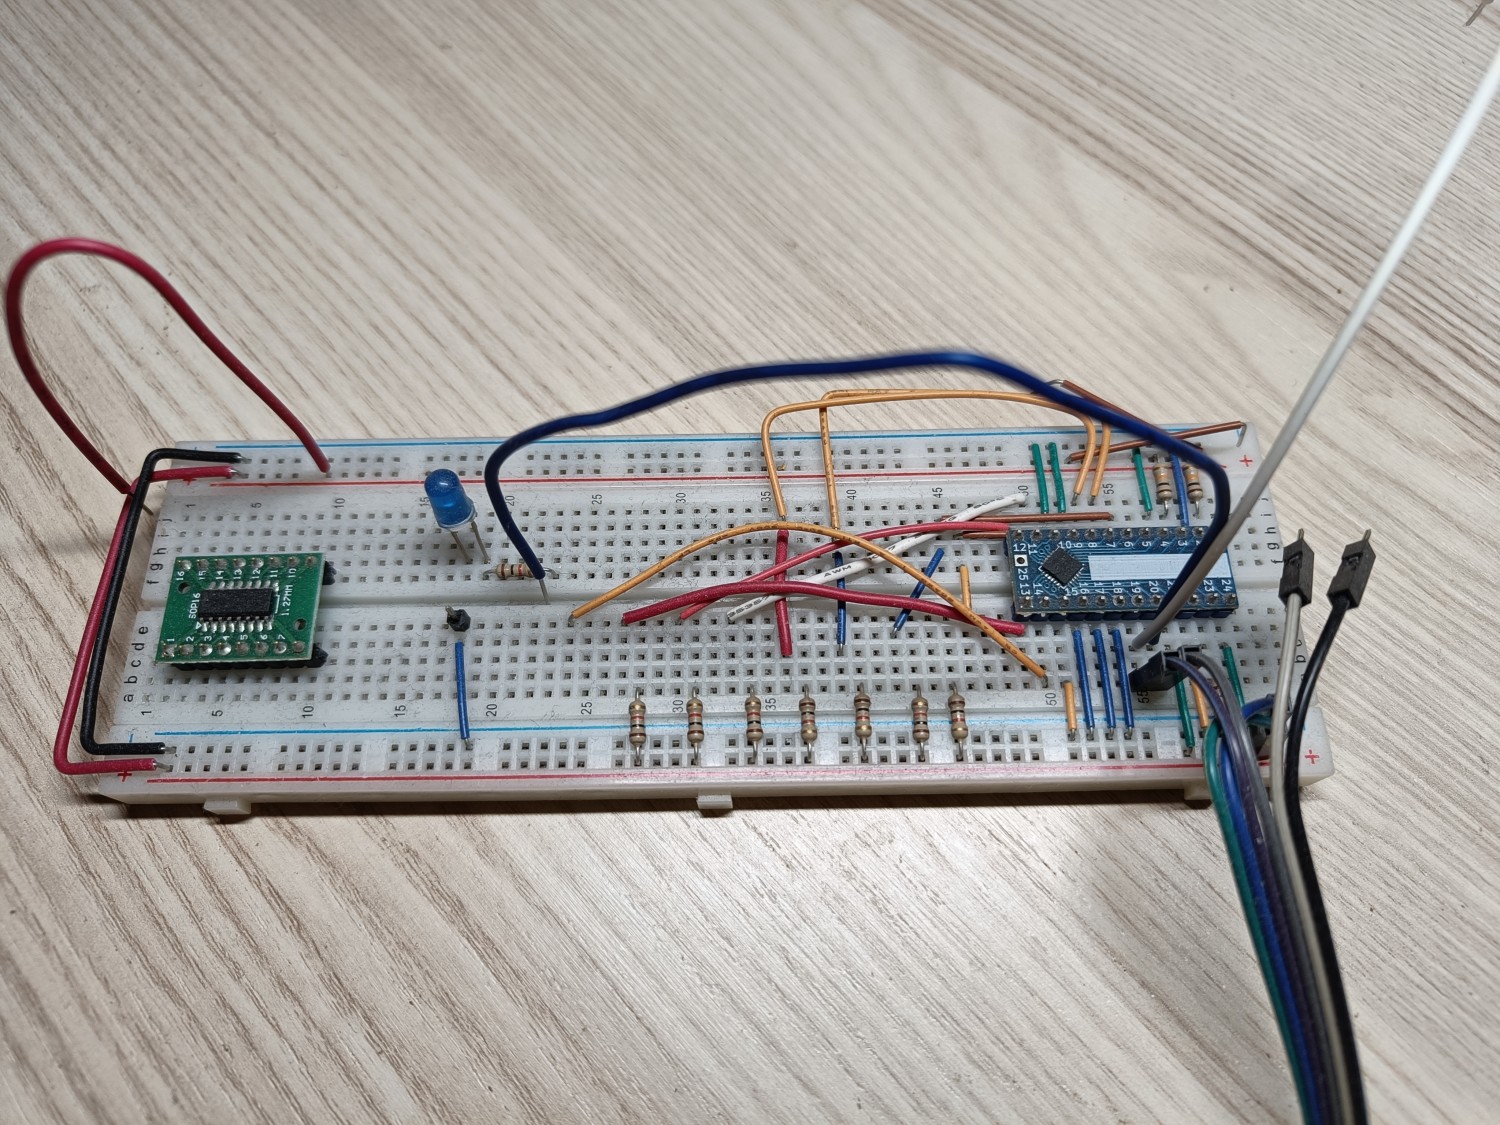 Photo of a breadboard with 2 chips, 1 LED and a whole lot of random cables